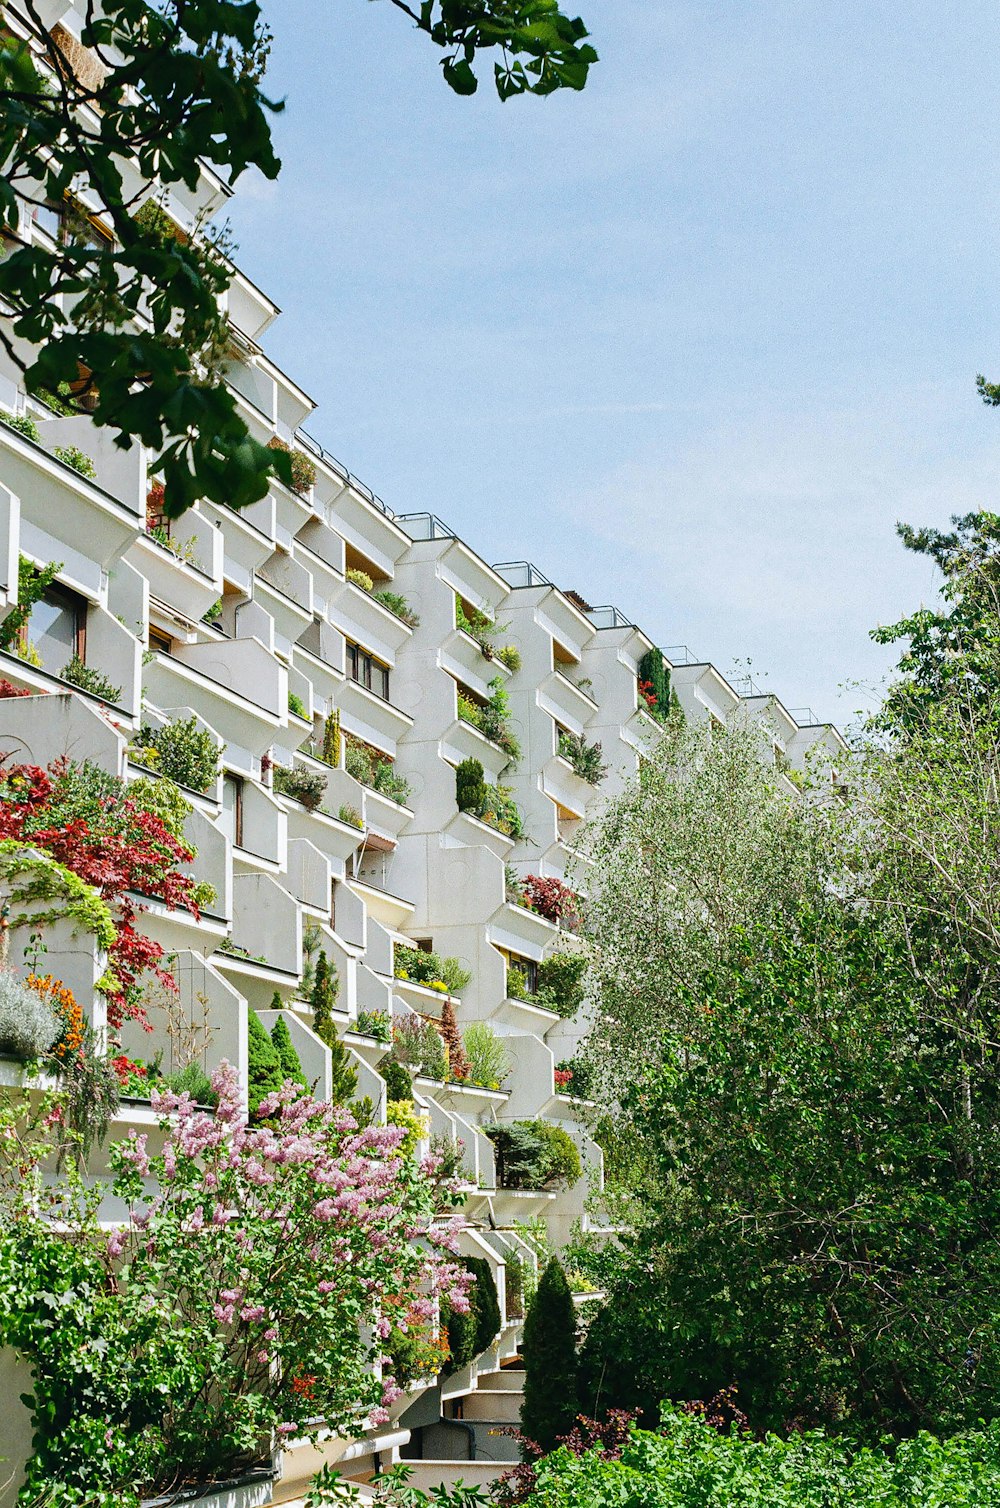 an apartment building with many balconies and flowers on the balconies